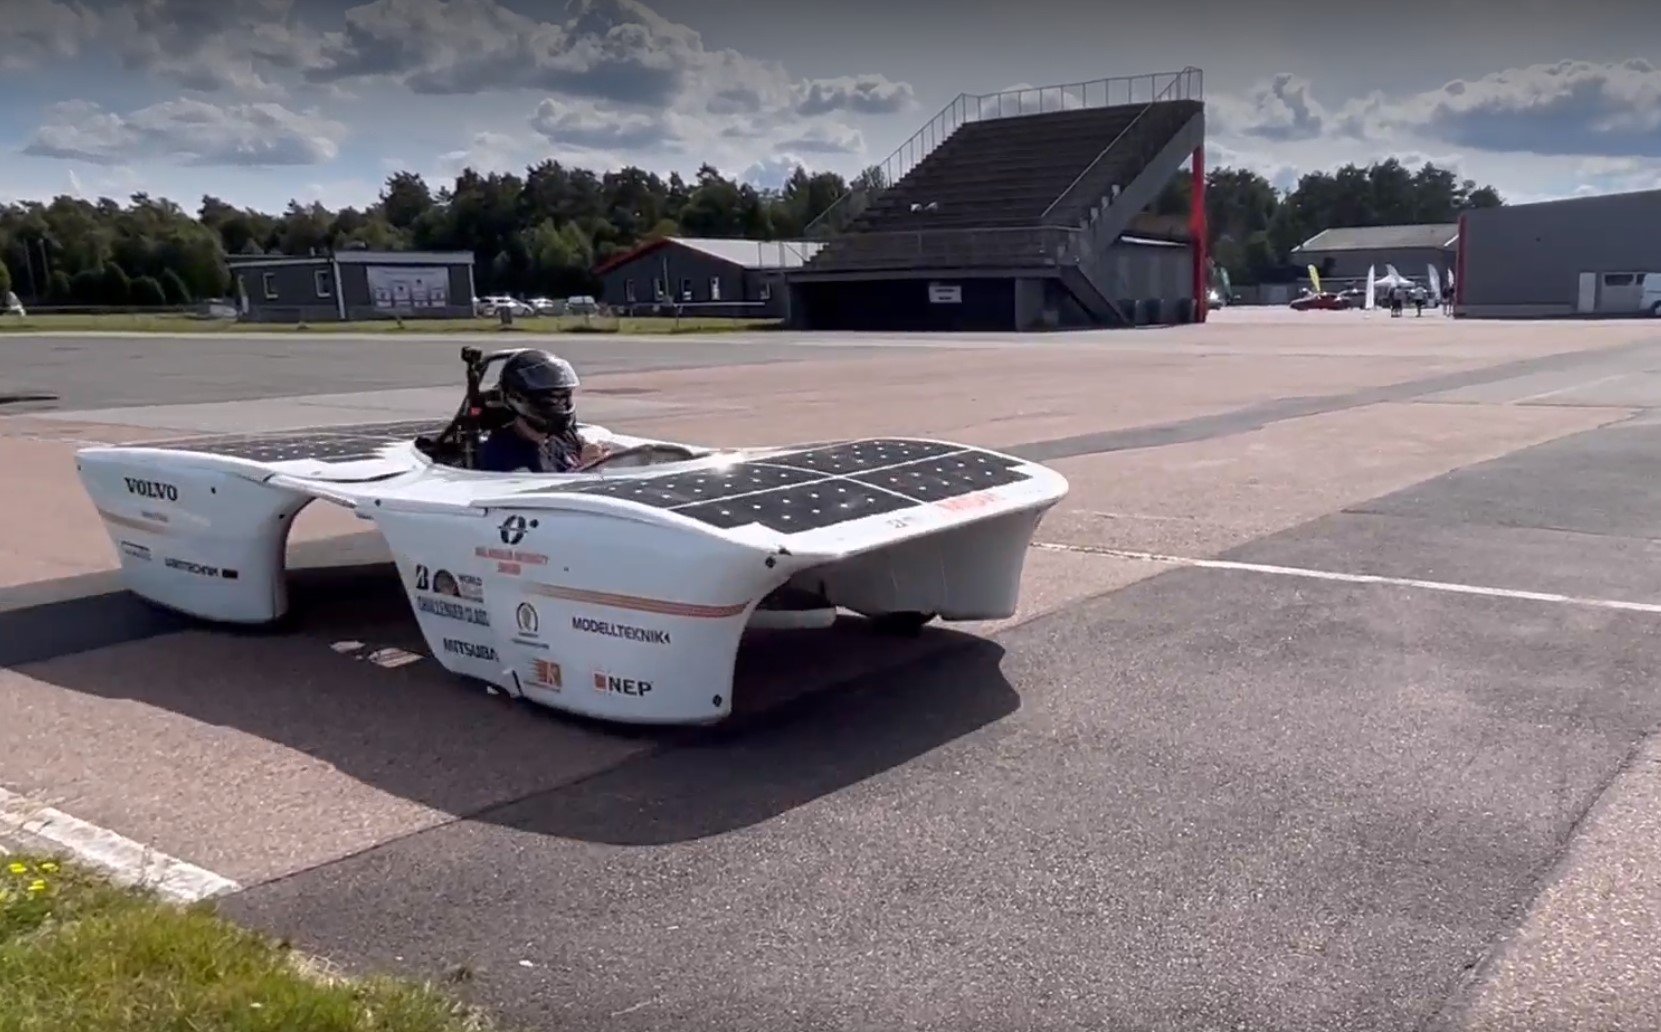 Student driving the solar powered car on the racecourse in Anderstorp, Sweden.